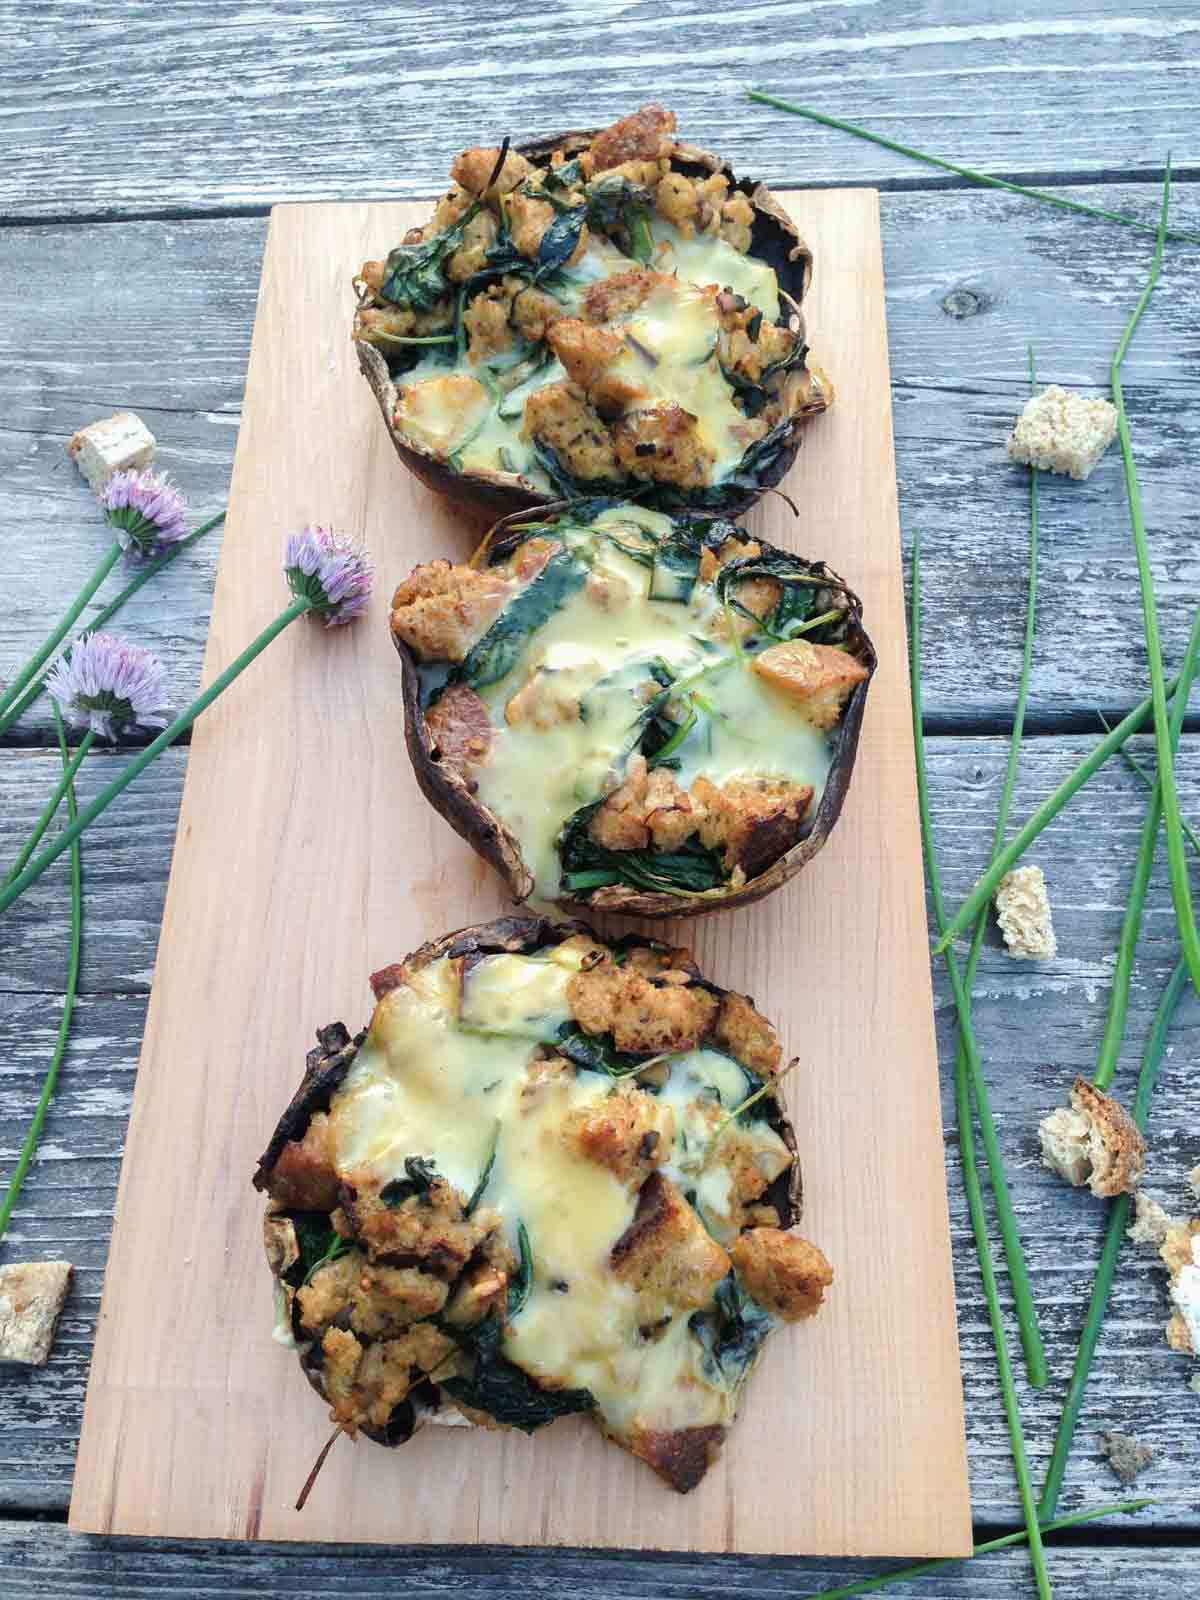 Grilled Cheesy Kale Stuffed Mushrooms, using a cedar plank this is your new favorite summer vegetarian grill recipe!